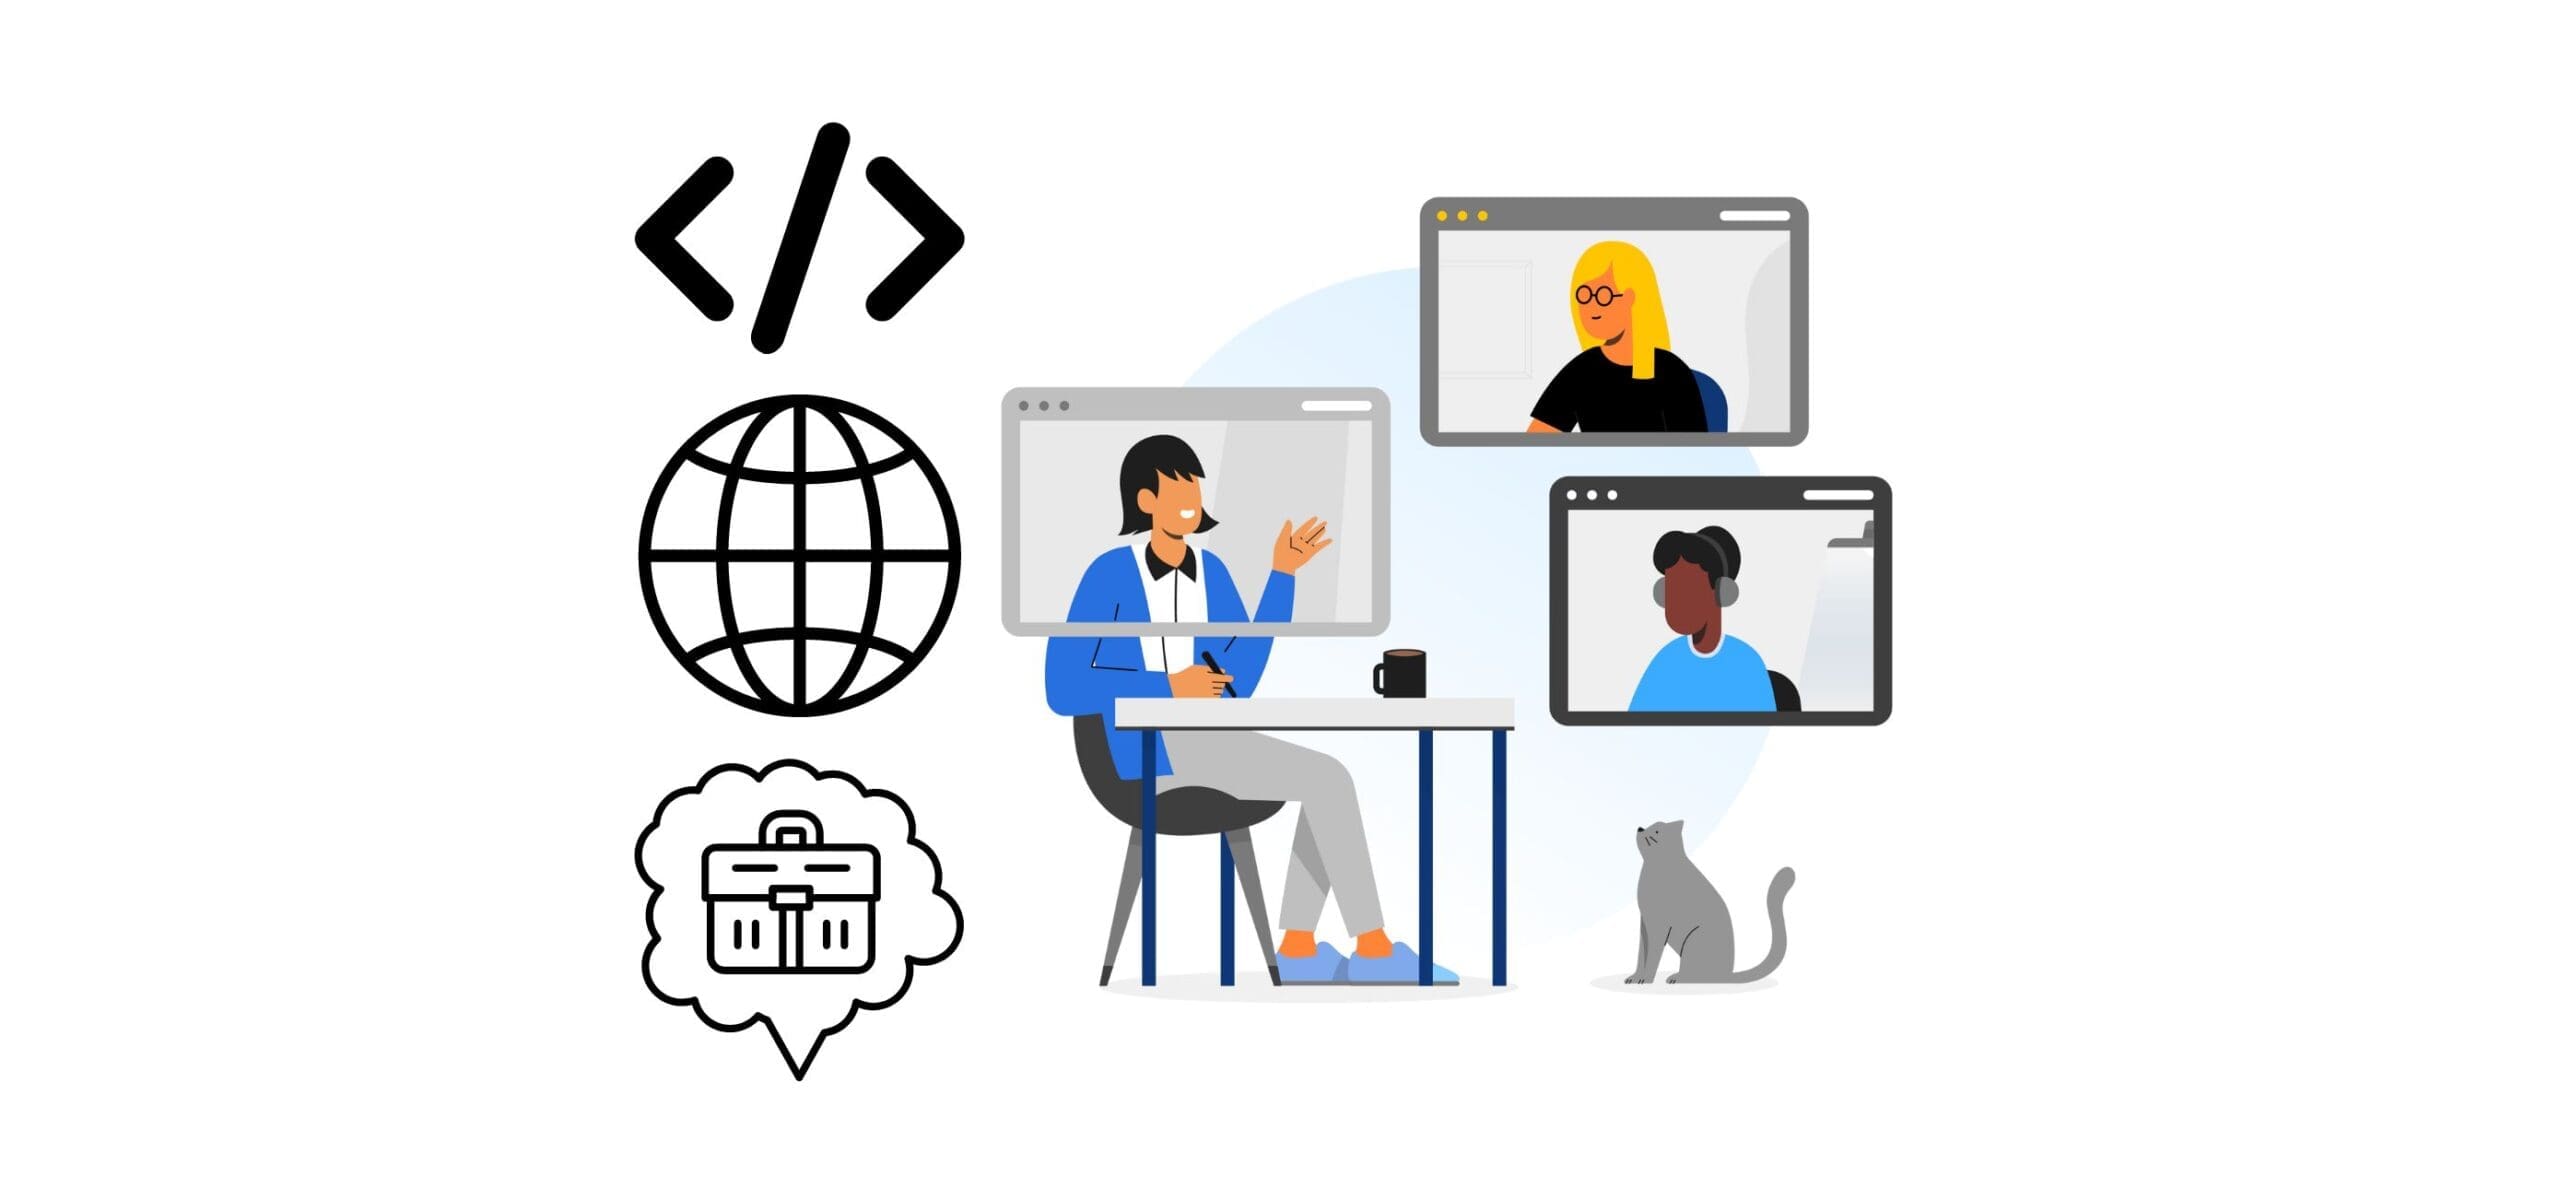 Illustration of a person sitting at a desk during a virtual meeting with three on-screen participants. Icons include HTML code, a globe, and a thinking cloud with a storefront. A cat sits beside the desk, providing comfort during what appears to be an entrevista técnica. CodersLink 2024.